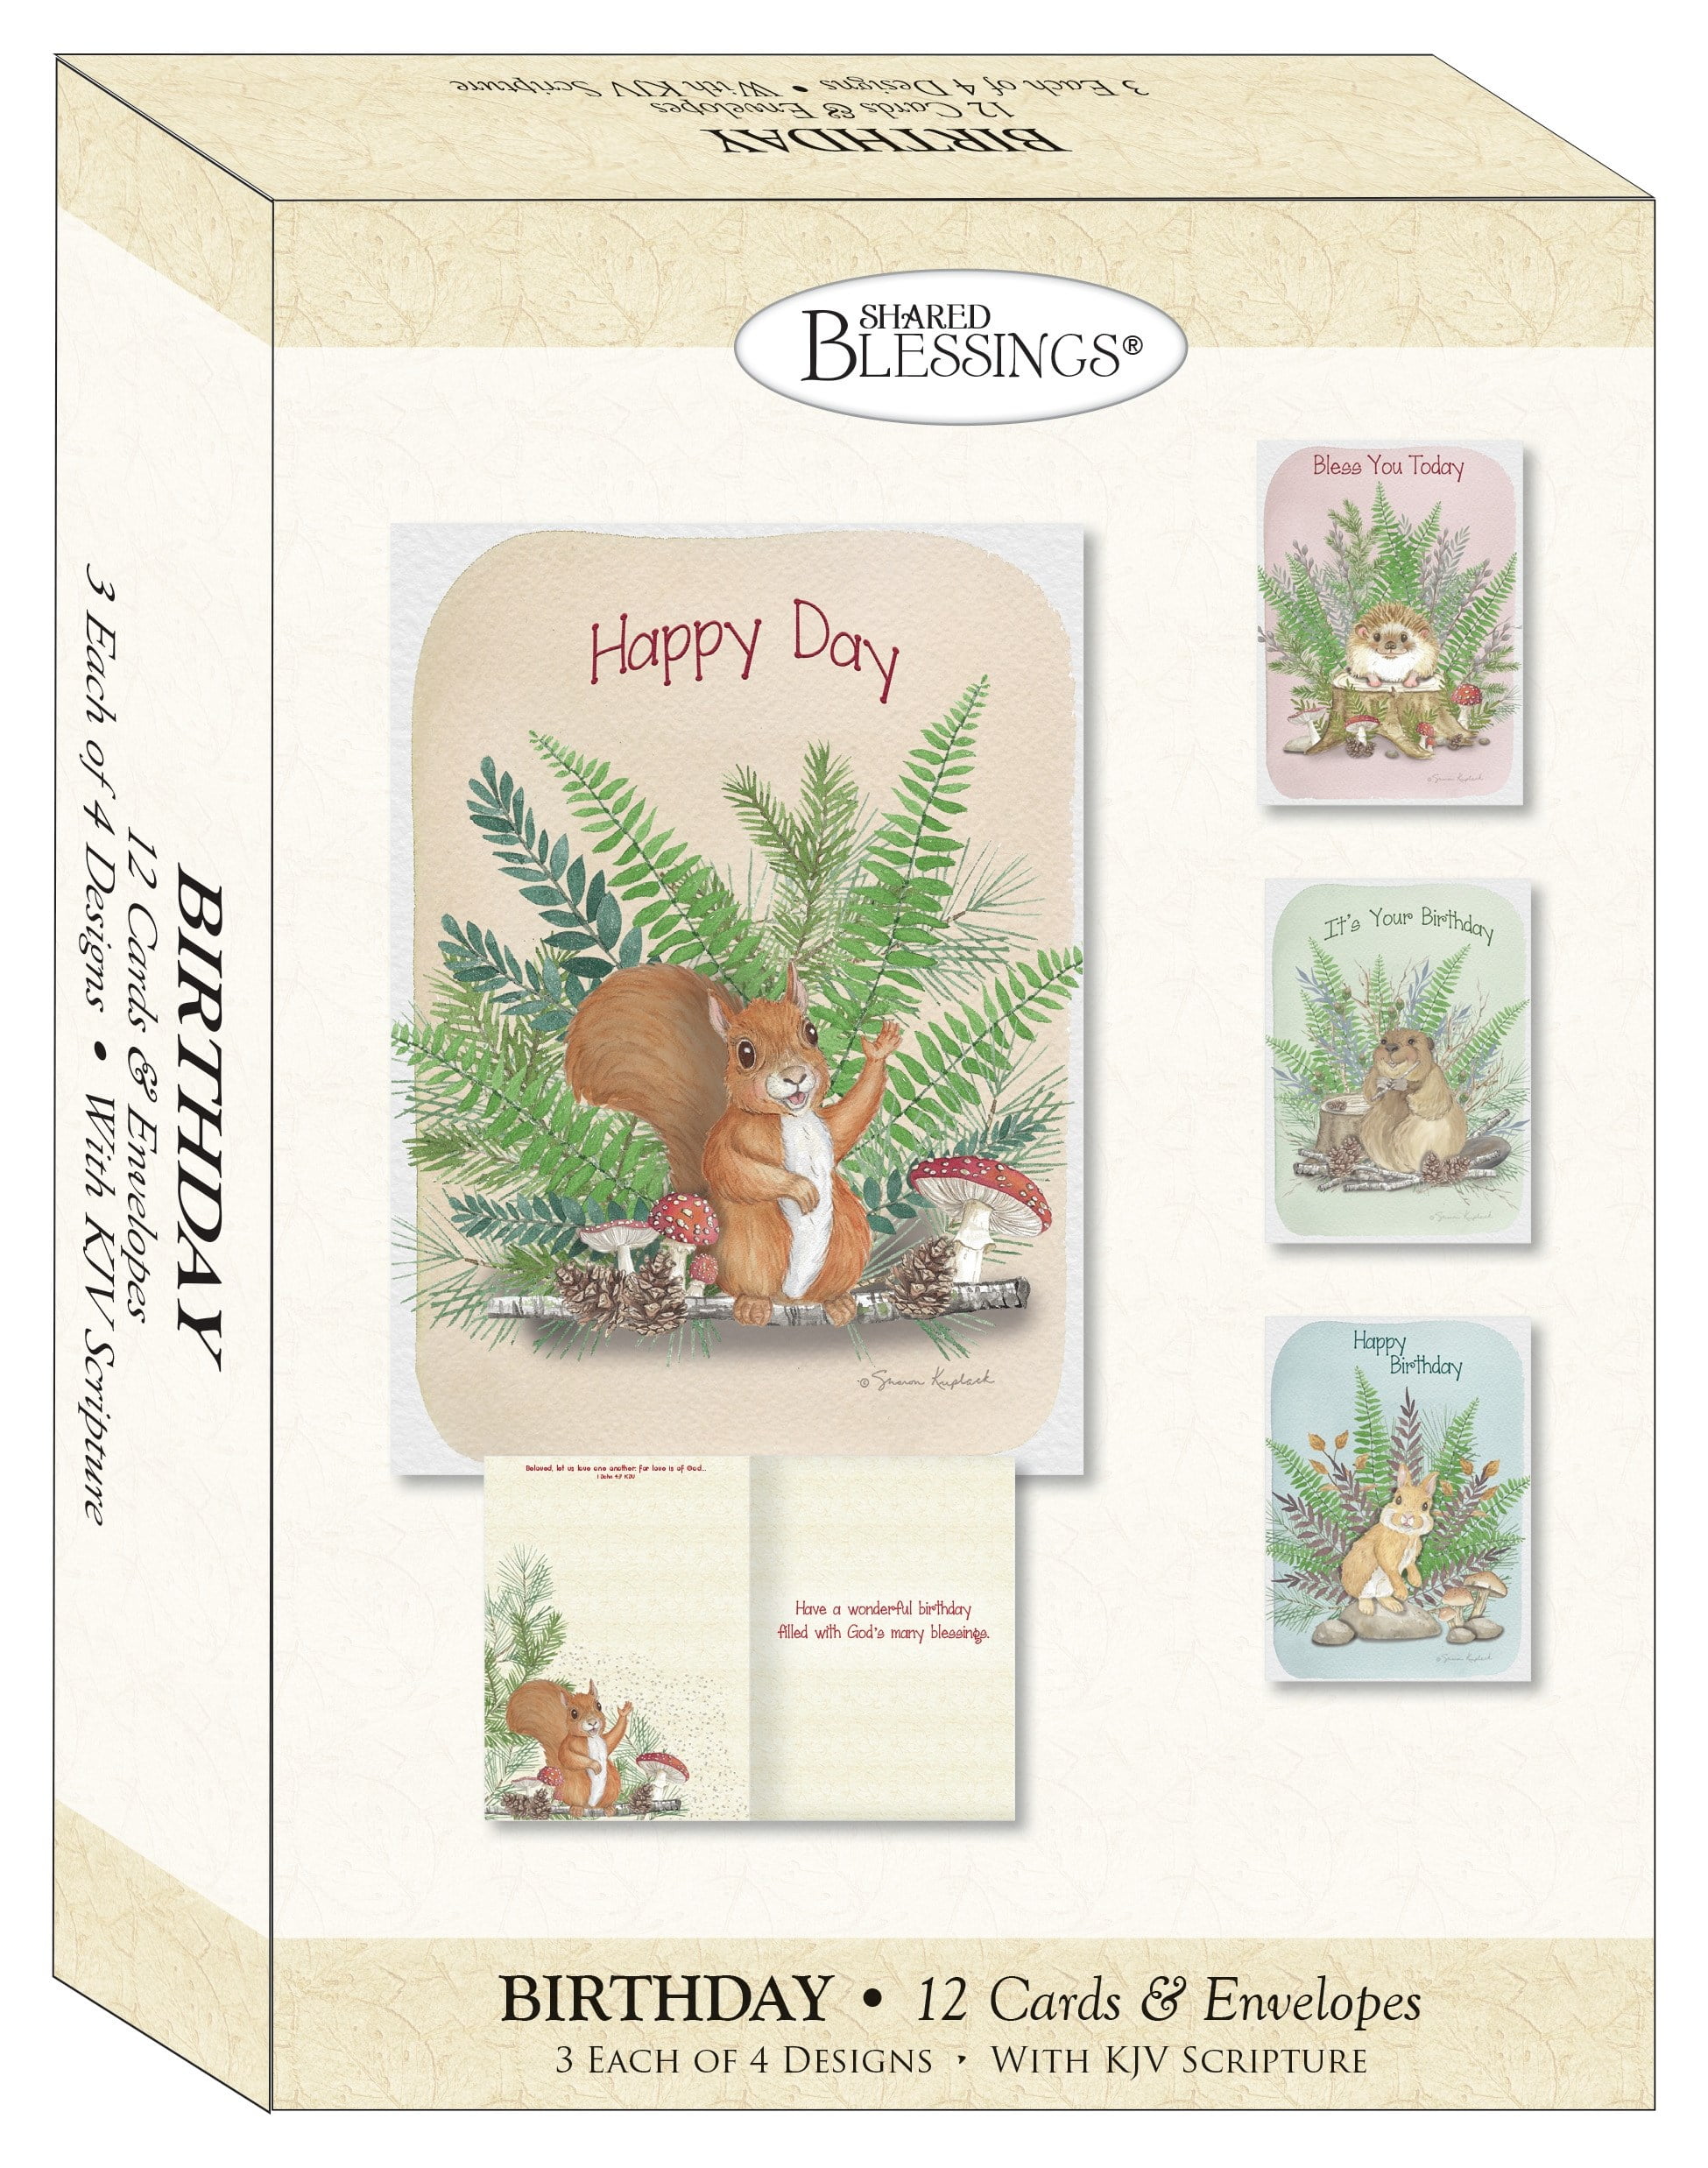 Picture of Crown Point Graphics 221626 Shared Blessings-Childrens Birthday-Woodland Critters Boxed Card - Pack of 12